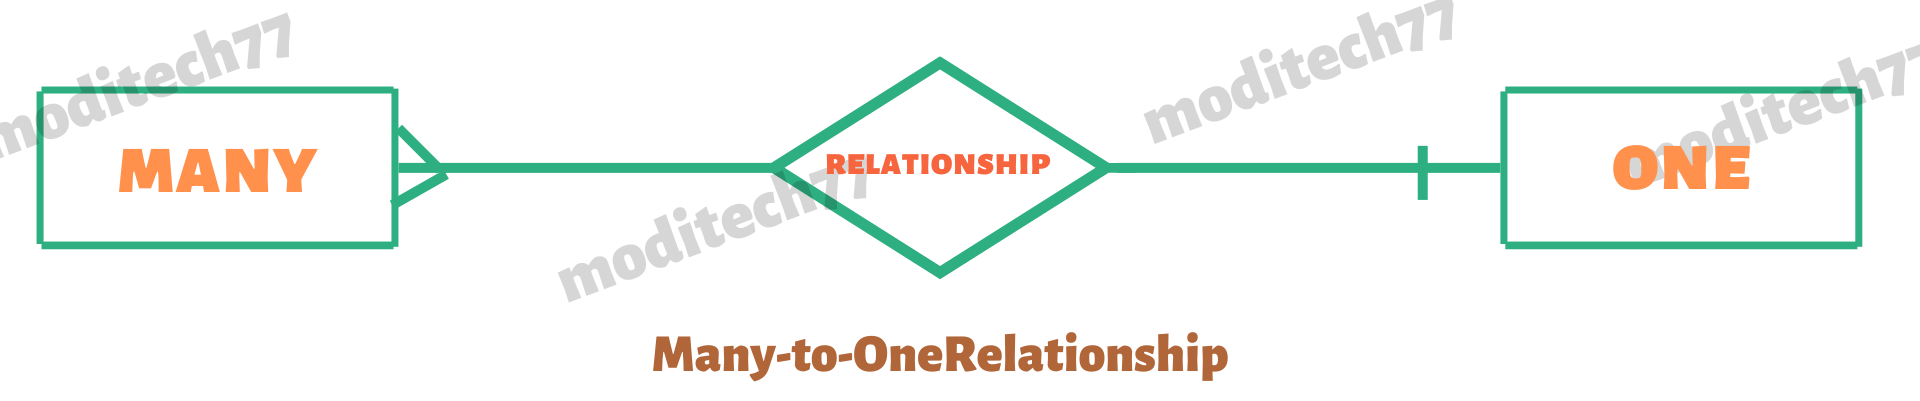 Many-to-One Relationships